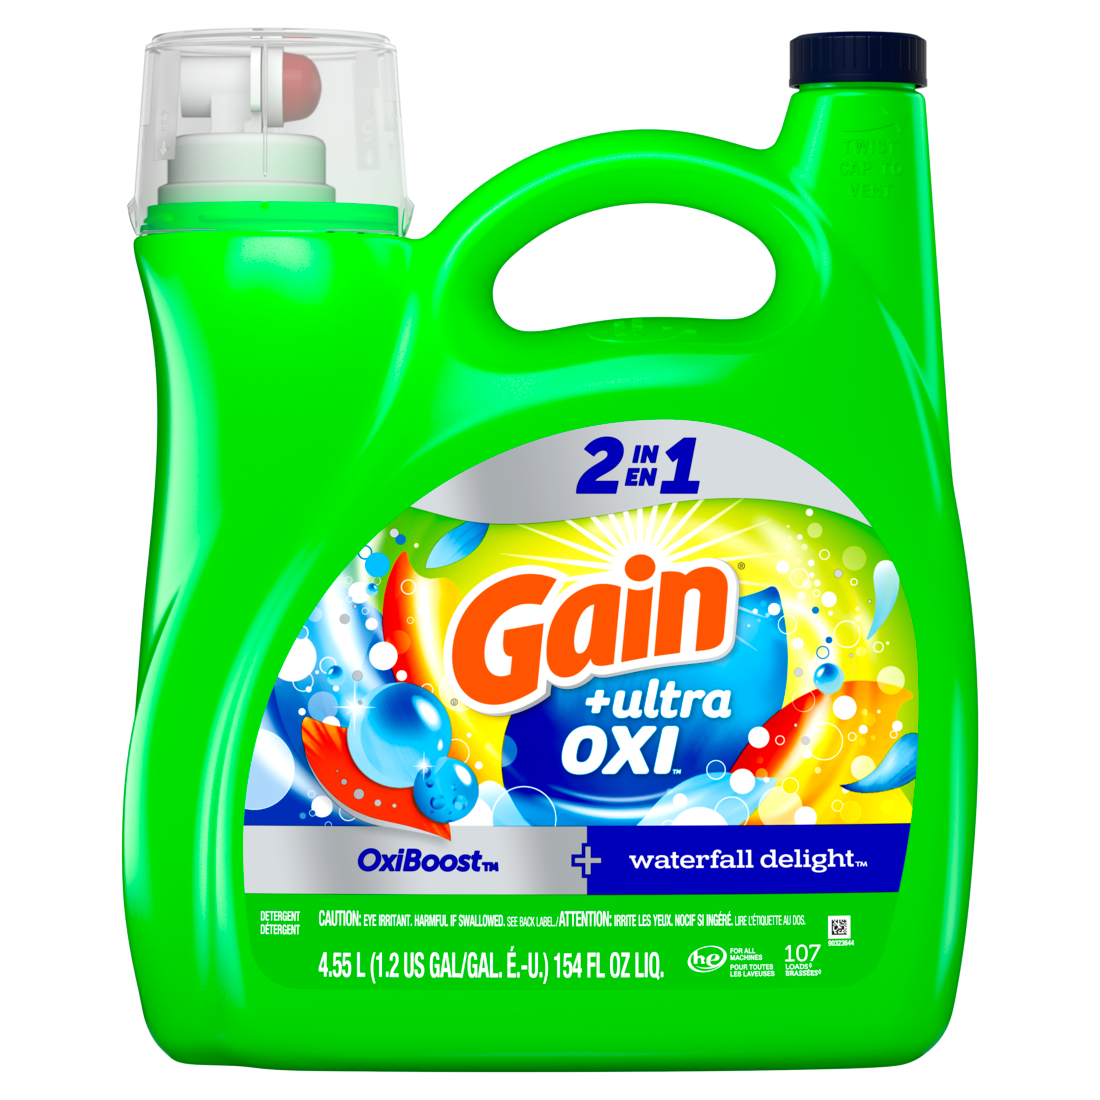 Liquid Laundry Detergent +Ultra Oxi, 154 Oz, Waterfall Delight Scent - Case of 4